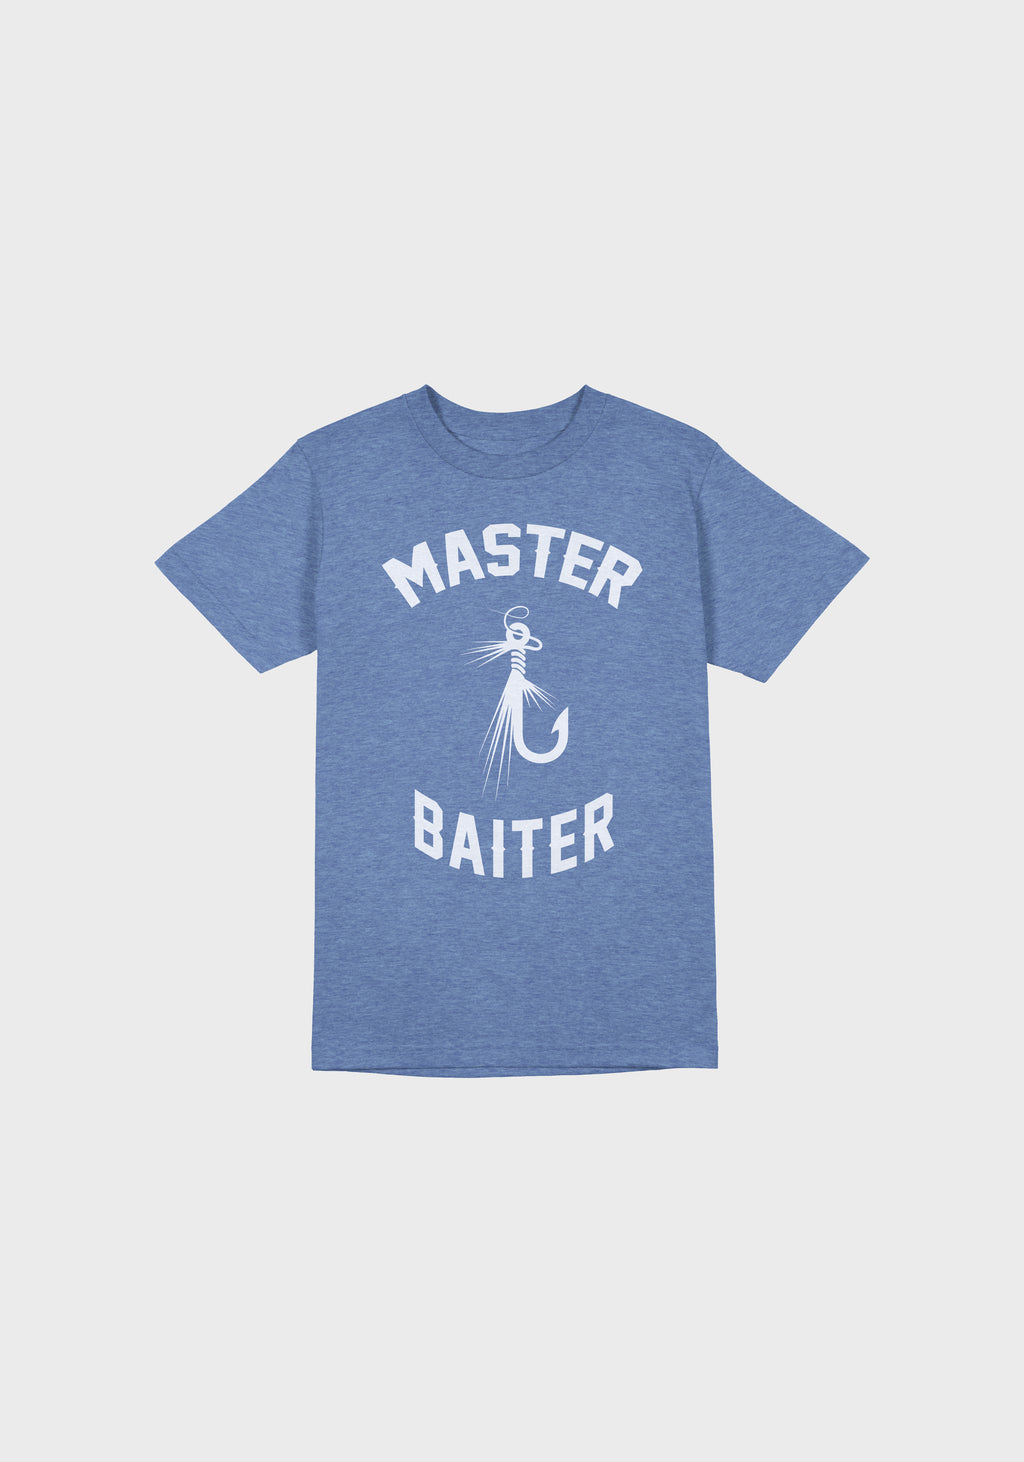 https://cdn.shopify.com/s/files/1/0613/0971/4679/products/MPLE-03-01-003---Master-Baiter-SS-Tee-_Product-Shots_1024x.jpg?v=1638418114